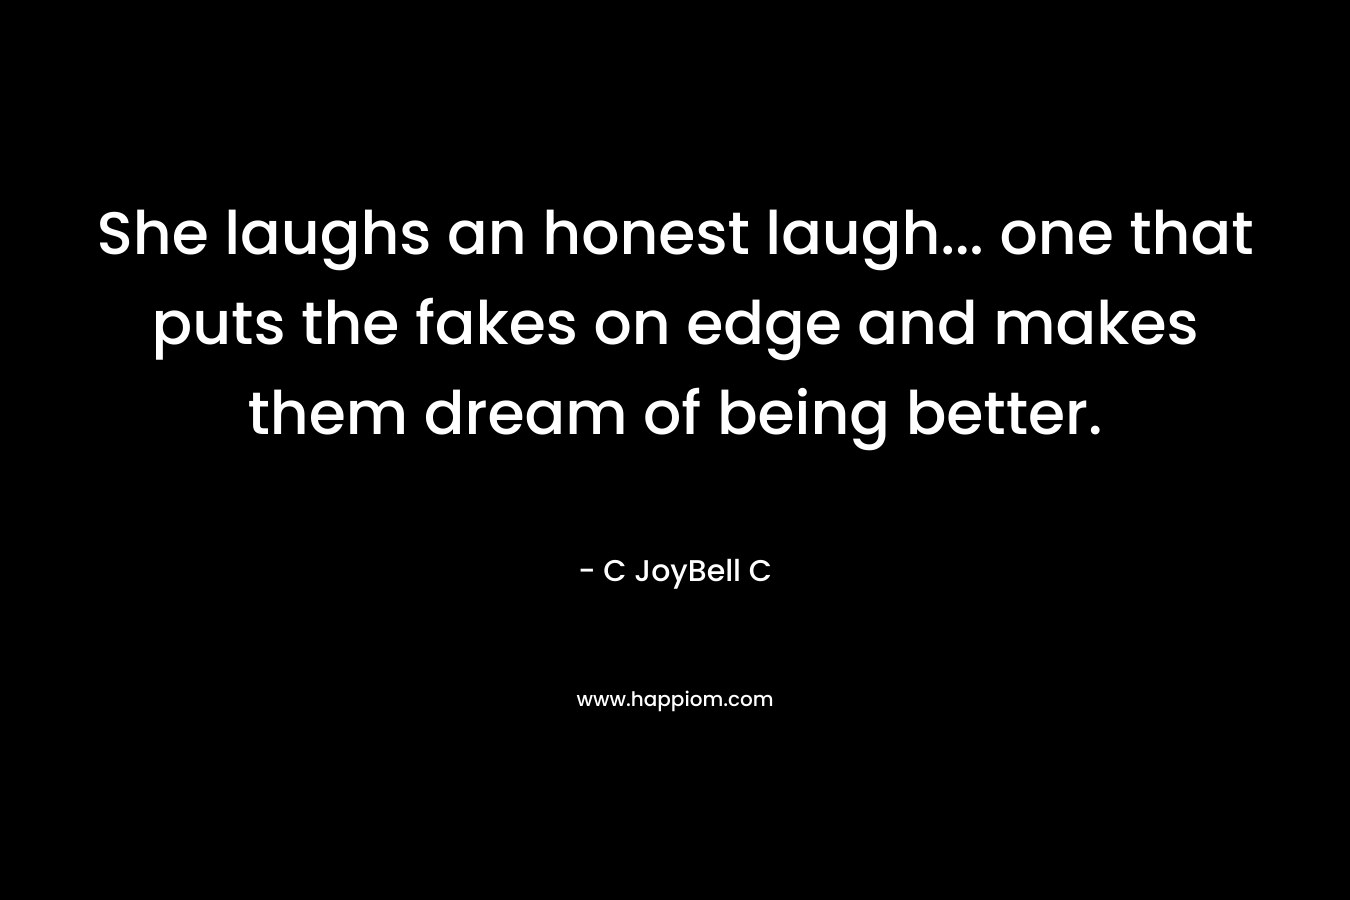 She laughs an honest laugh... one that puts the fakes on edge and makes them dream of being better.